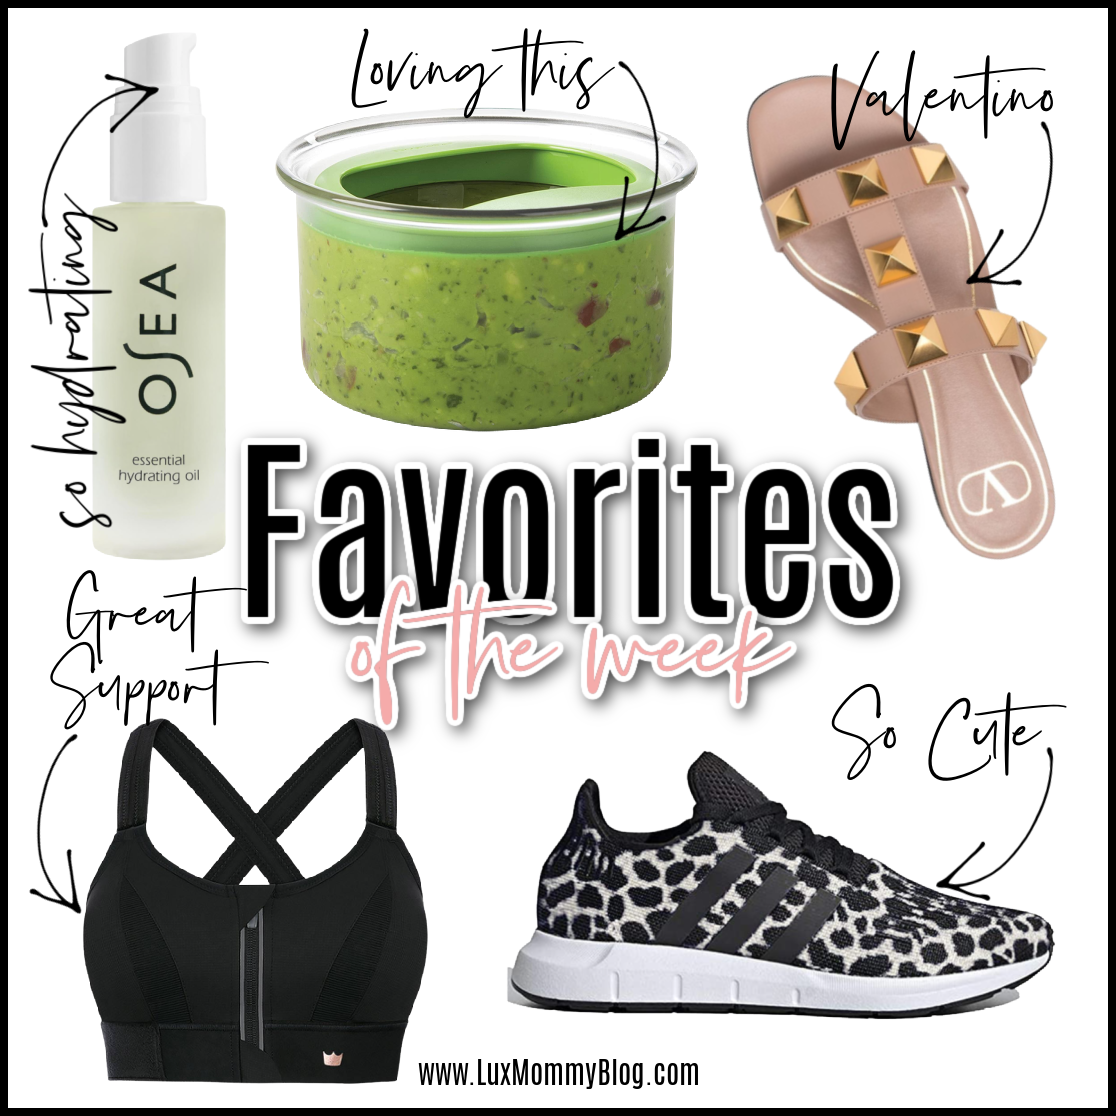 Houston lifestyle and fashion blogger LuxMommy sharing favorites of the week